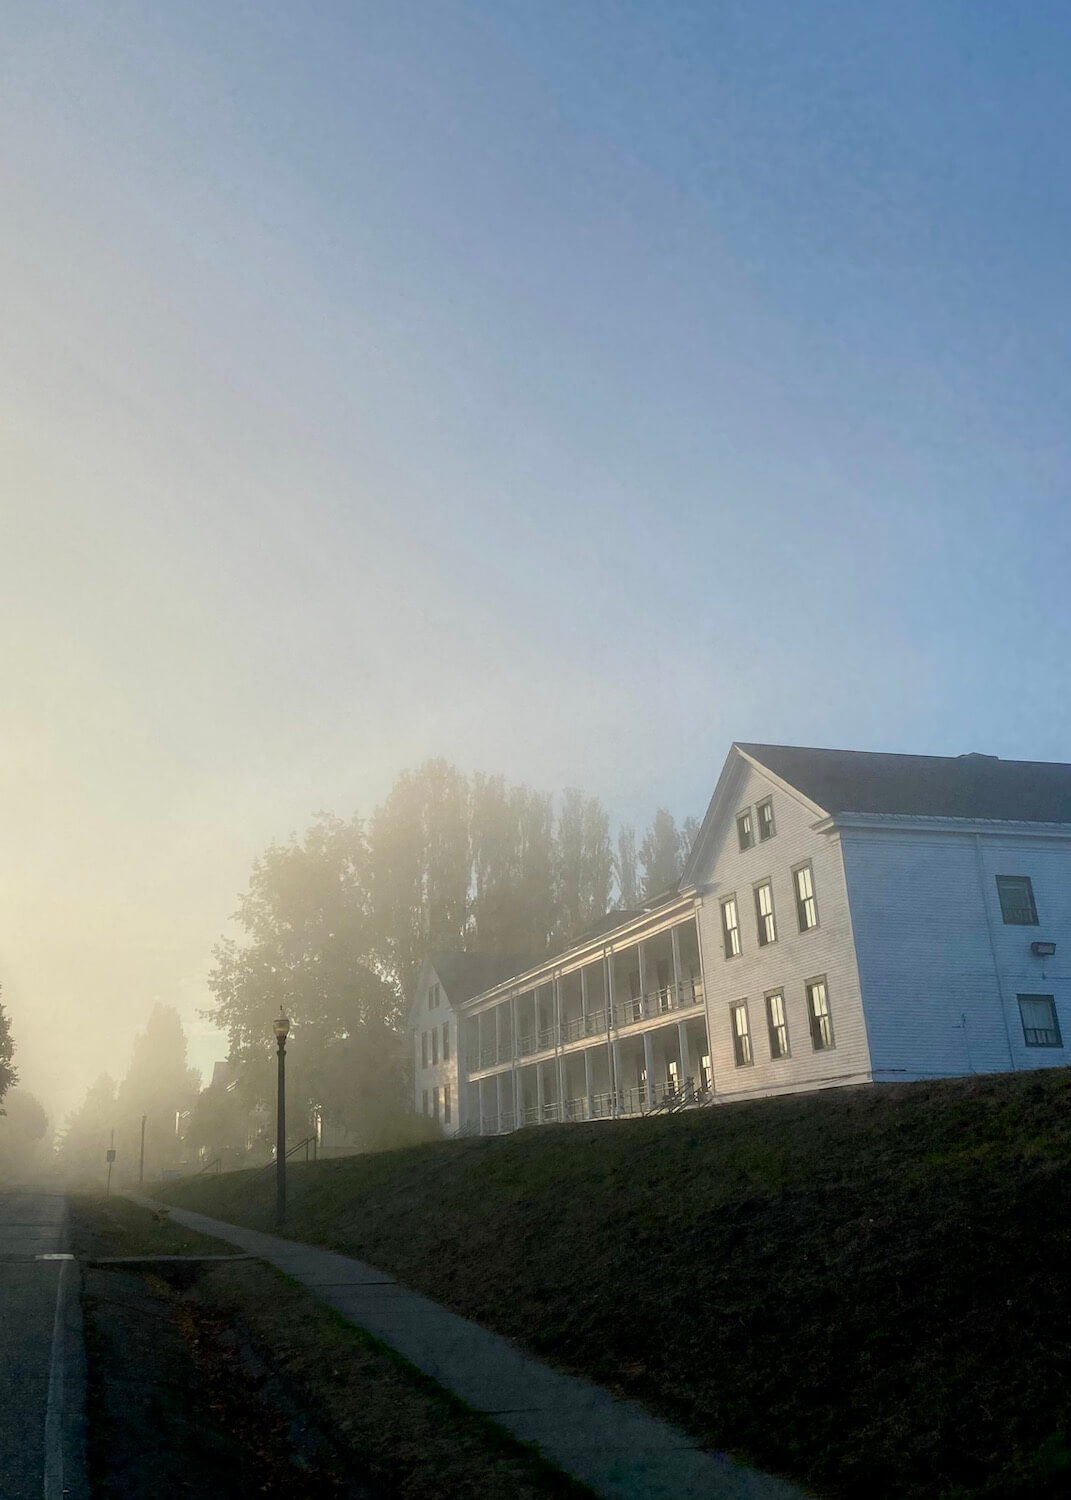 A misty evening comes to life under blue sky with an old style military barracks painted white and double paned windows peeks through the mist at Fort Worden State Park.